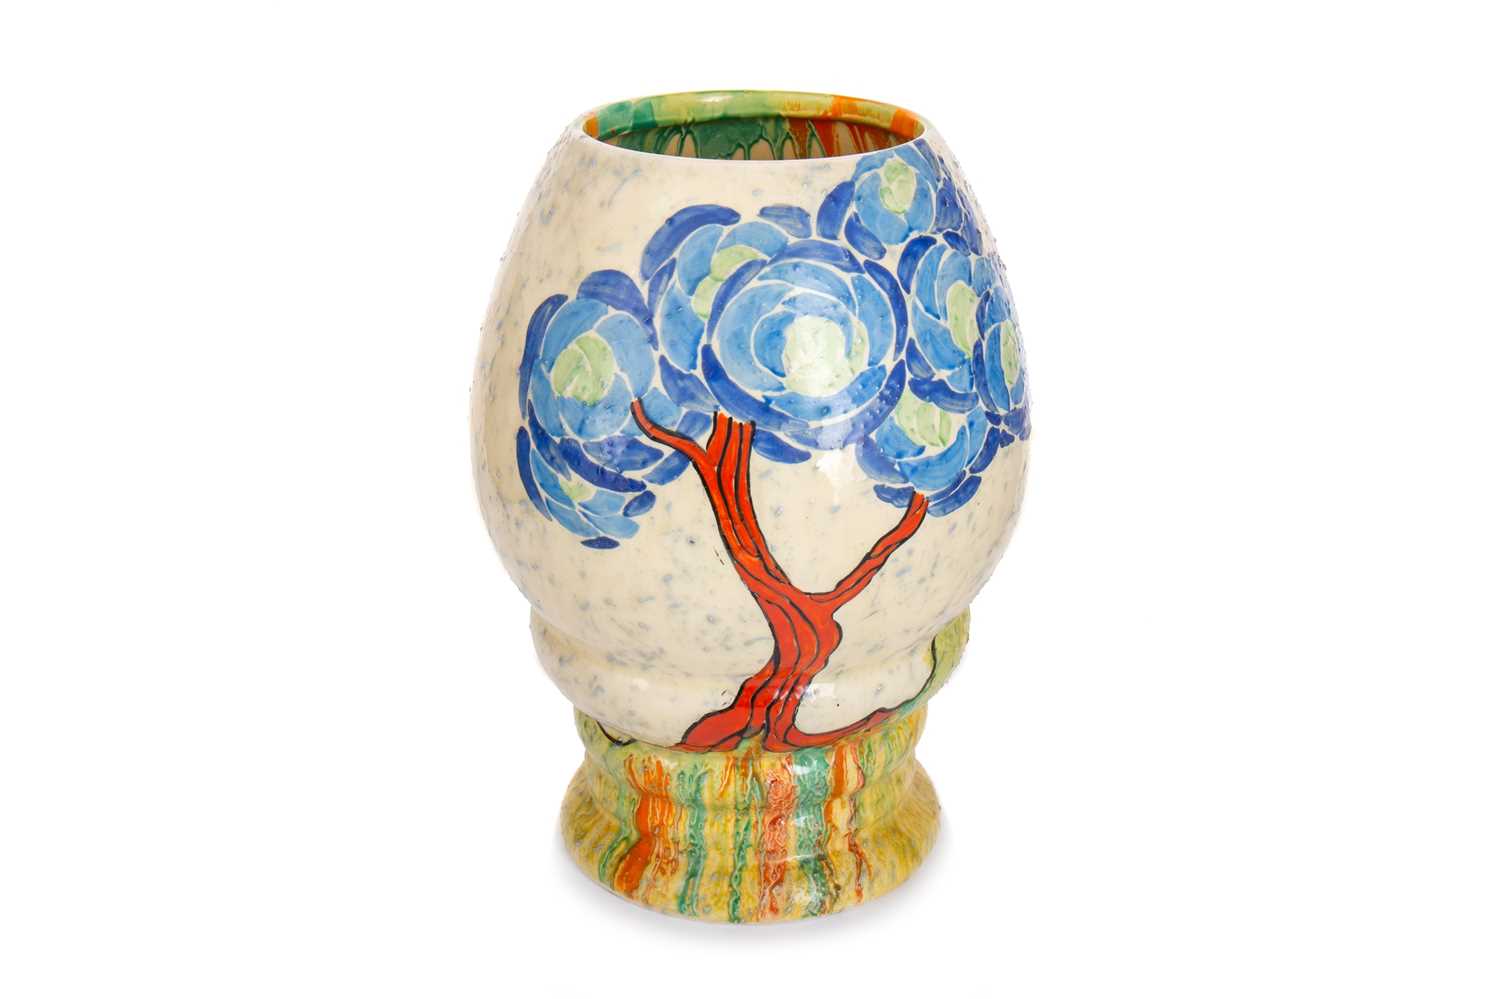 CLARICE CLIFF (1899–1972) FOR NEWPORT POTTERY, PATINA TREE PATTERN VASE, CIRCA 1935